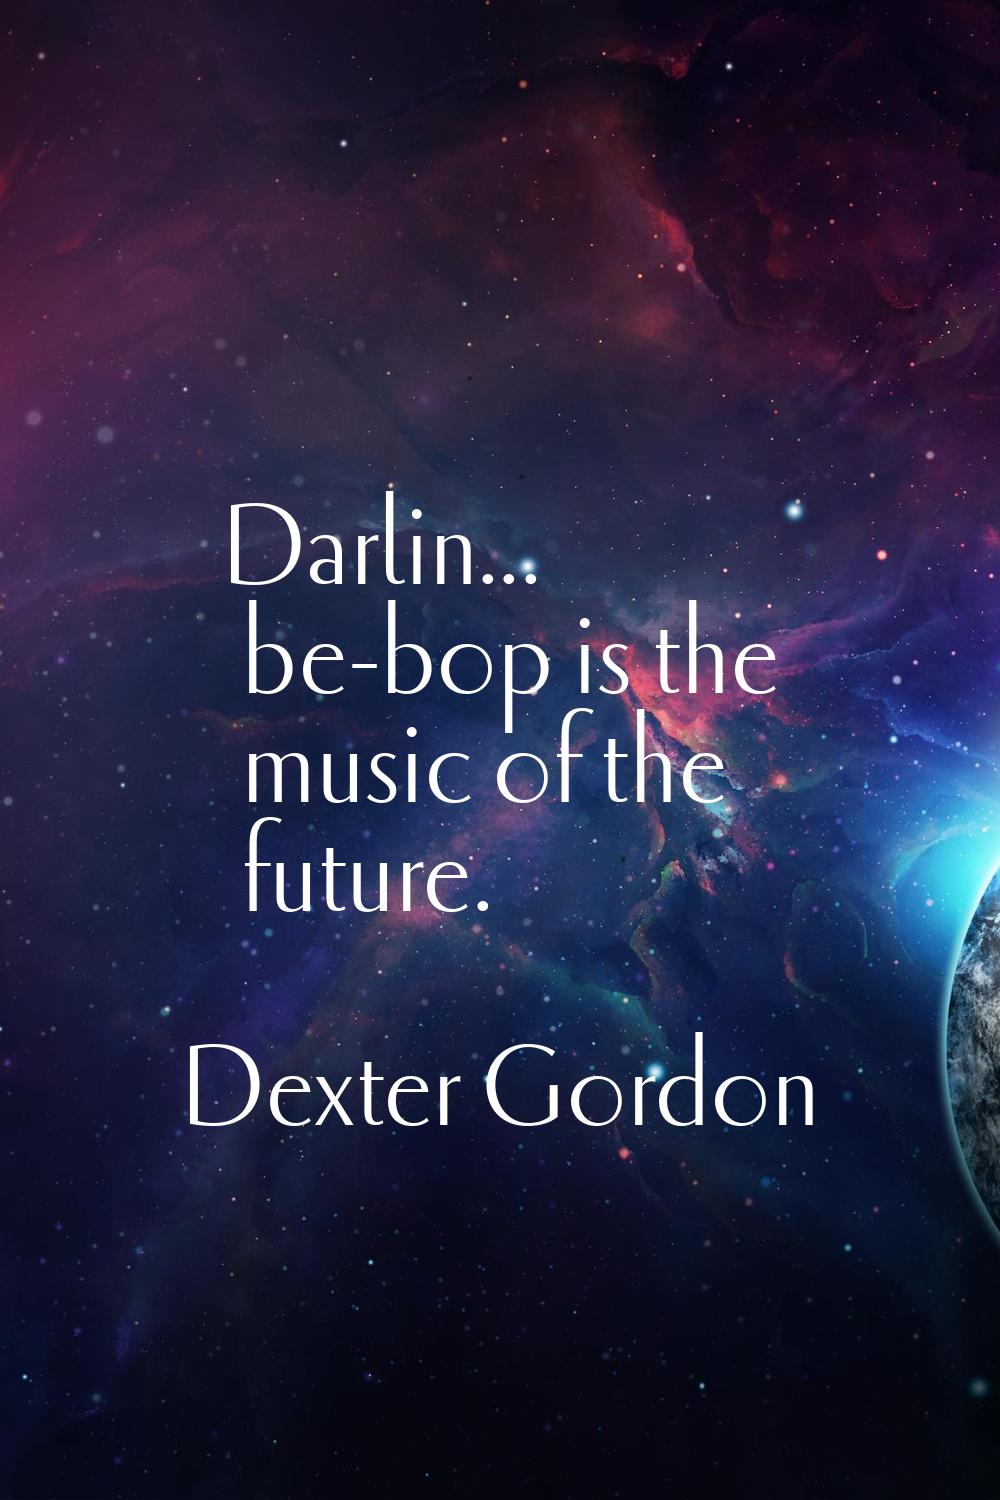 Darlin... be-bop is the music of the future.